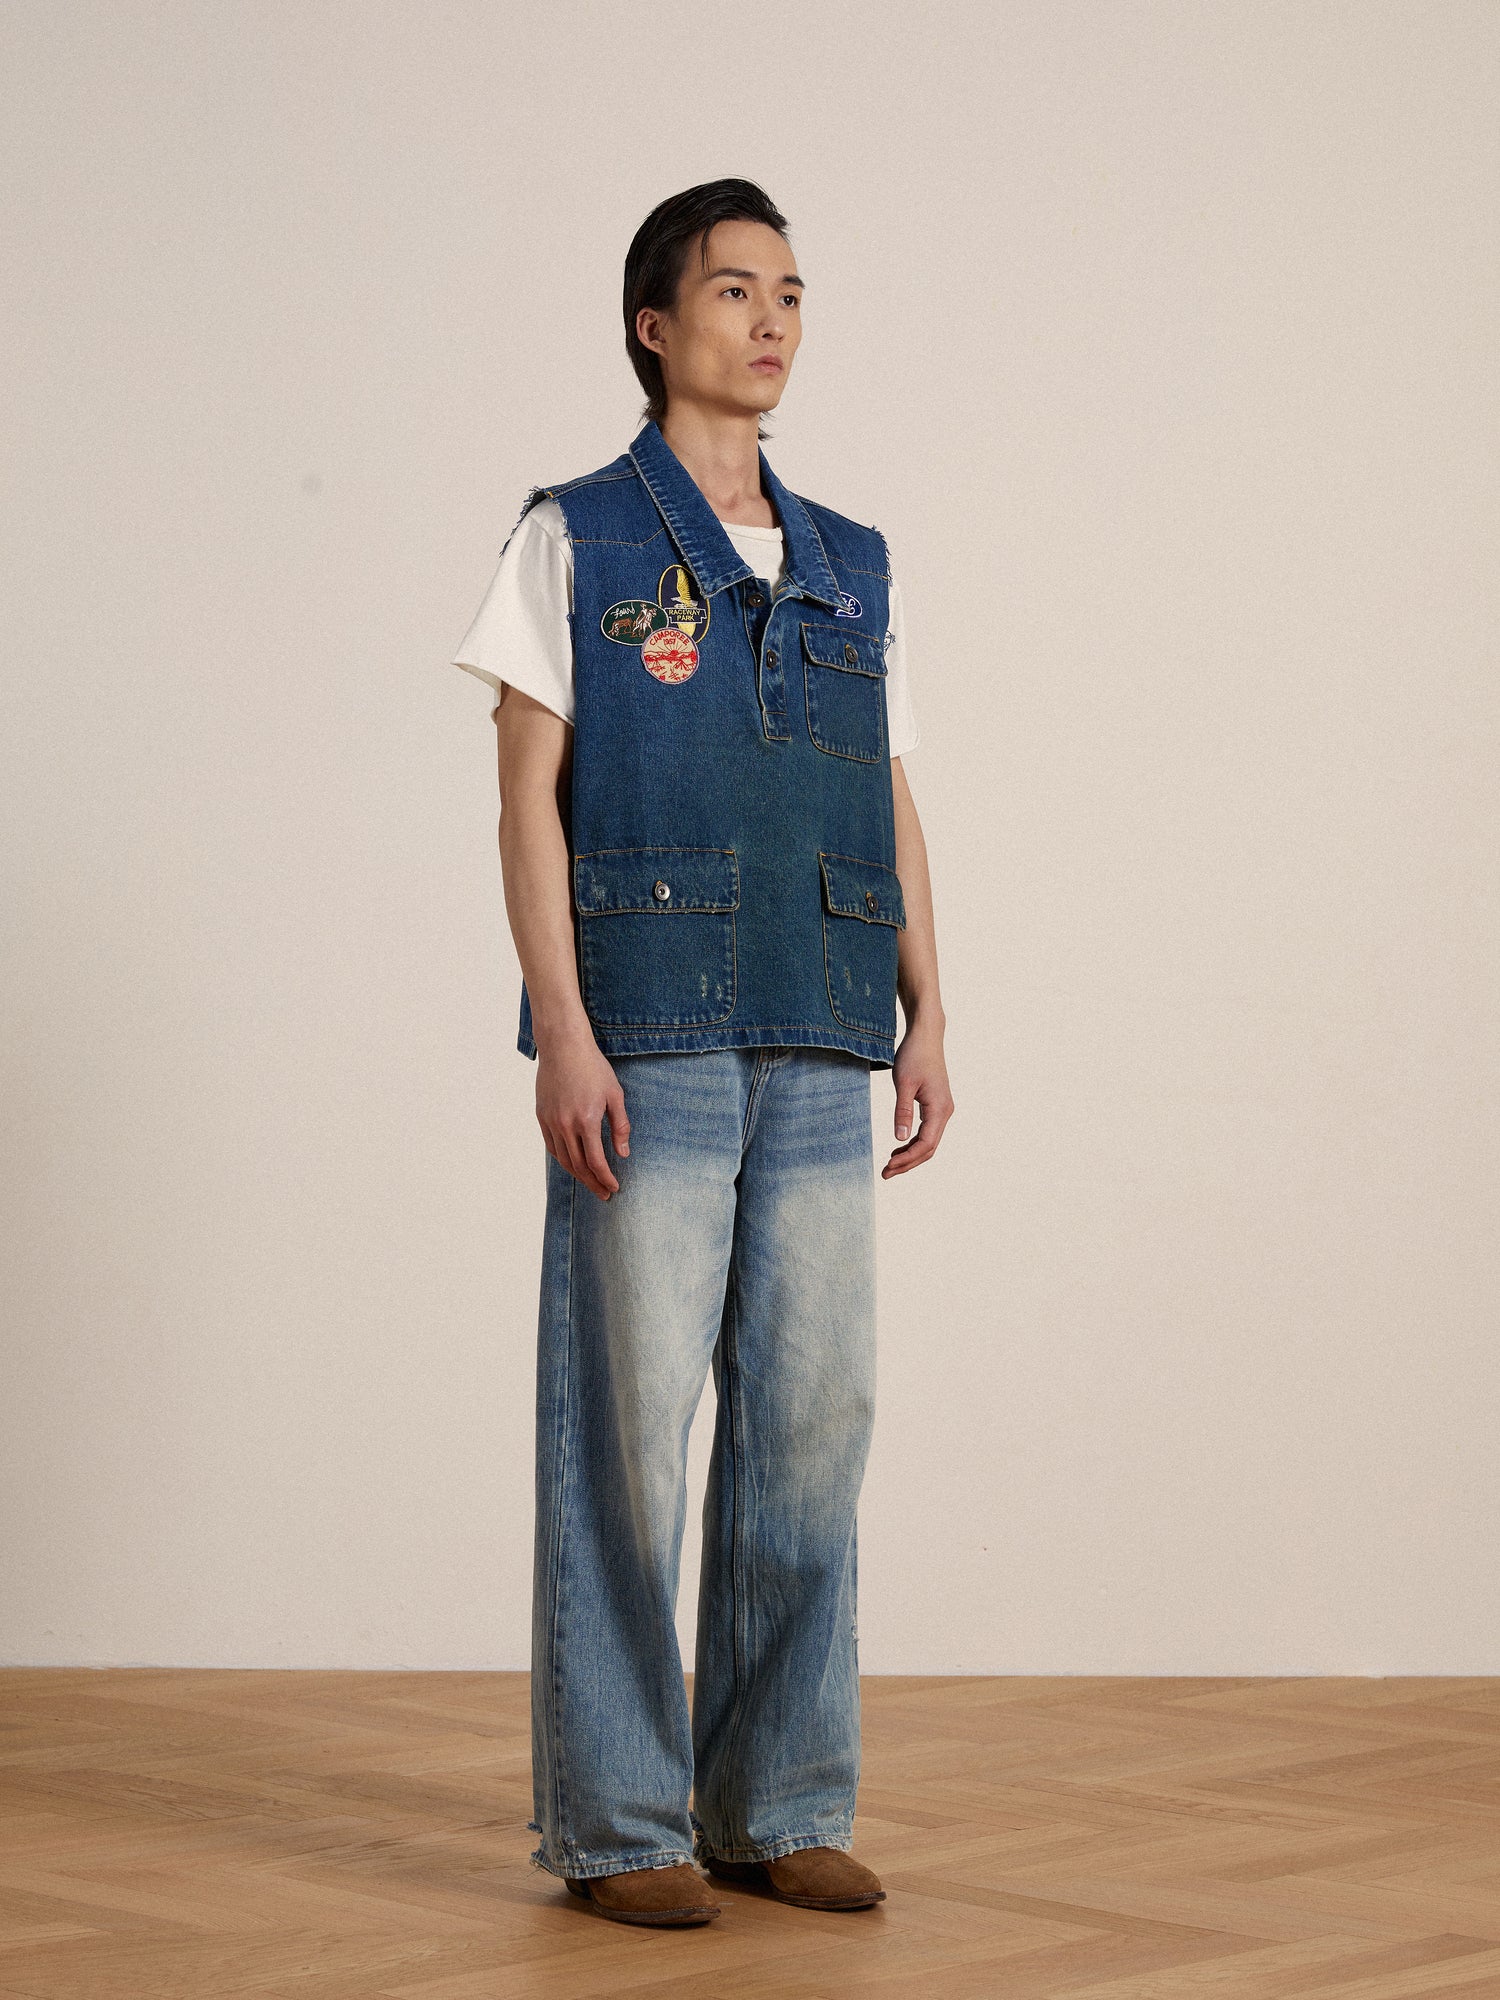 A man in a vintage-inspired Found Raw Cut Patch Mechanic Denim vest adorned with embroidered patches, standing on a wooden floor.